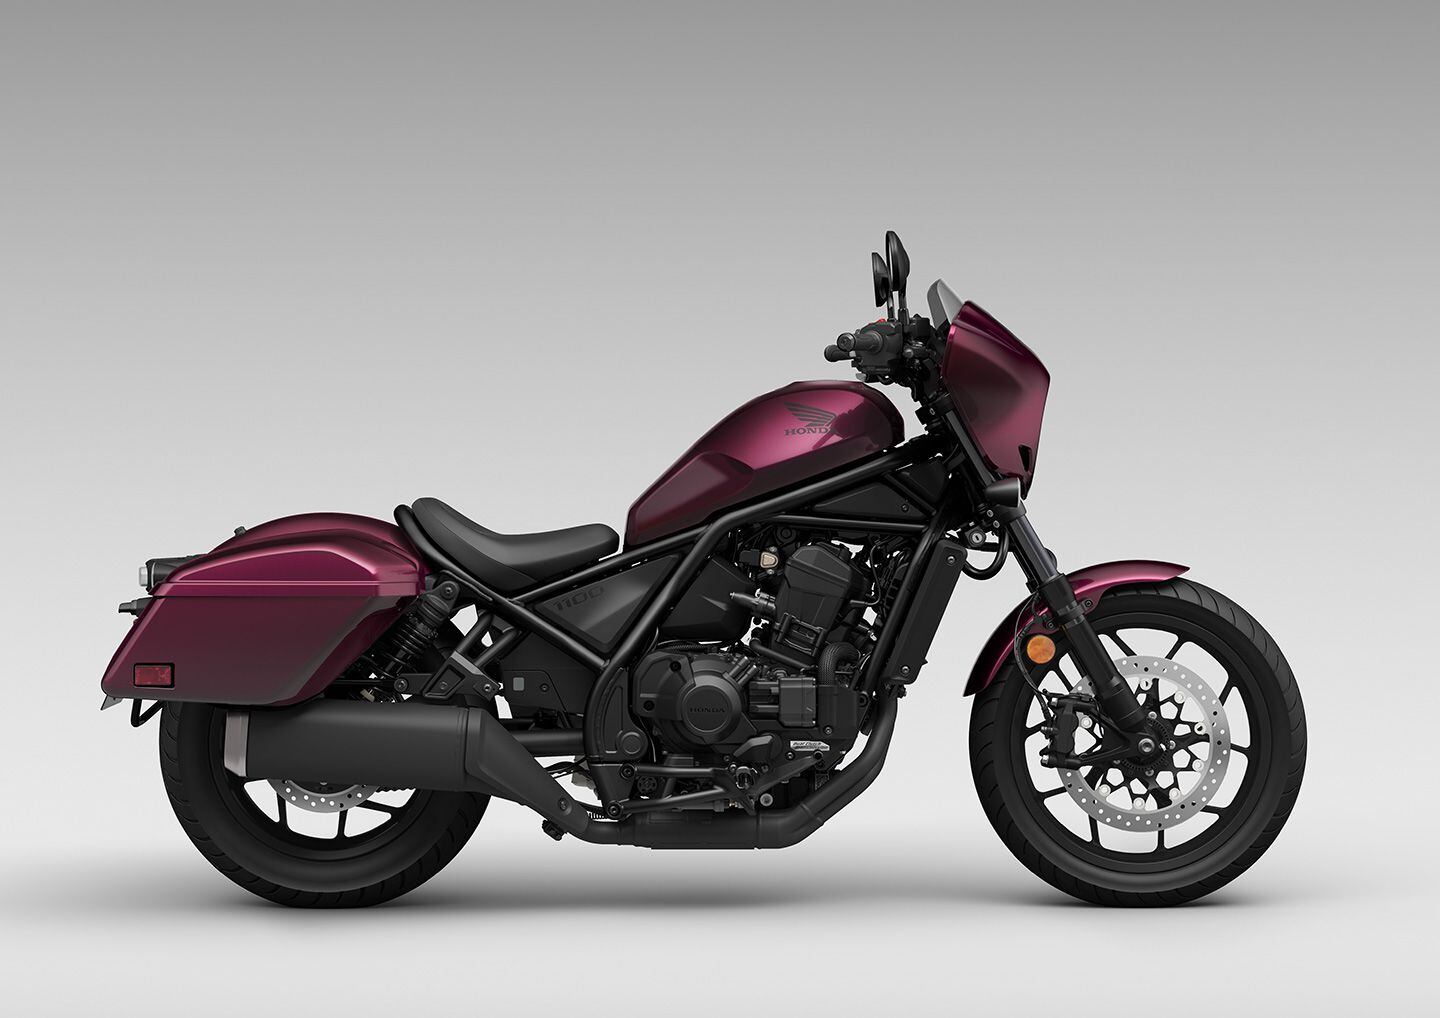 The 2023 Rebel 1100T DCT in Bordeaux Red Metallic ($11,299). A windscreen, standard Dual Clutch Transmission (DCT), and hard saddlebags make the 1100T the top of the Rebel food chain.